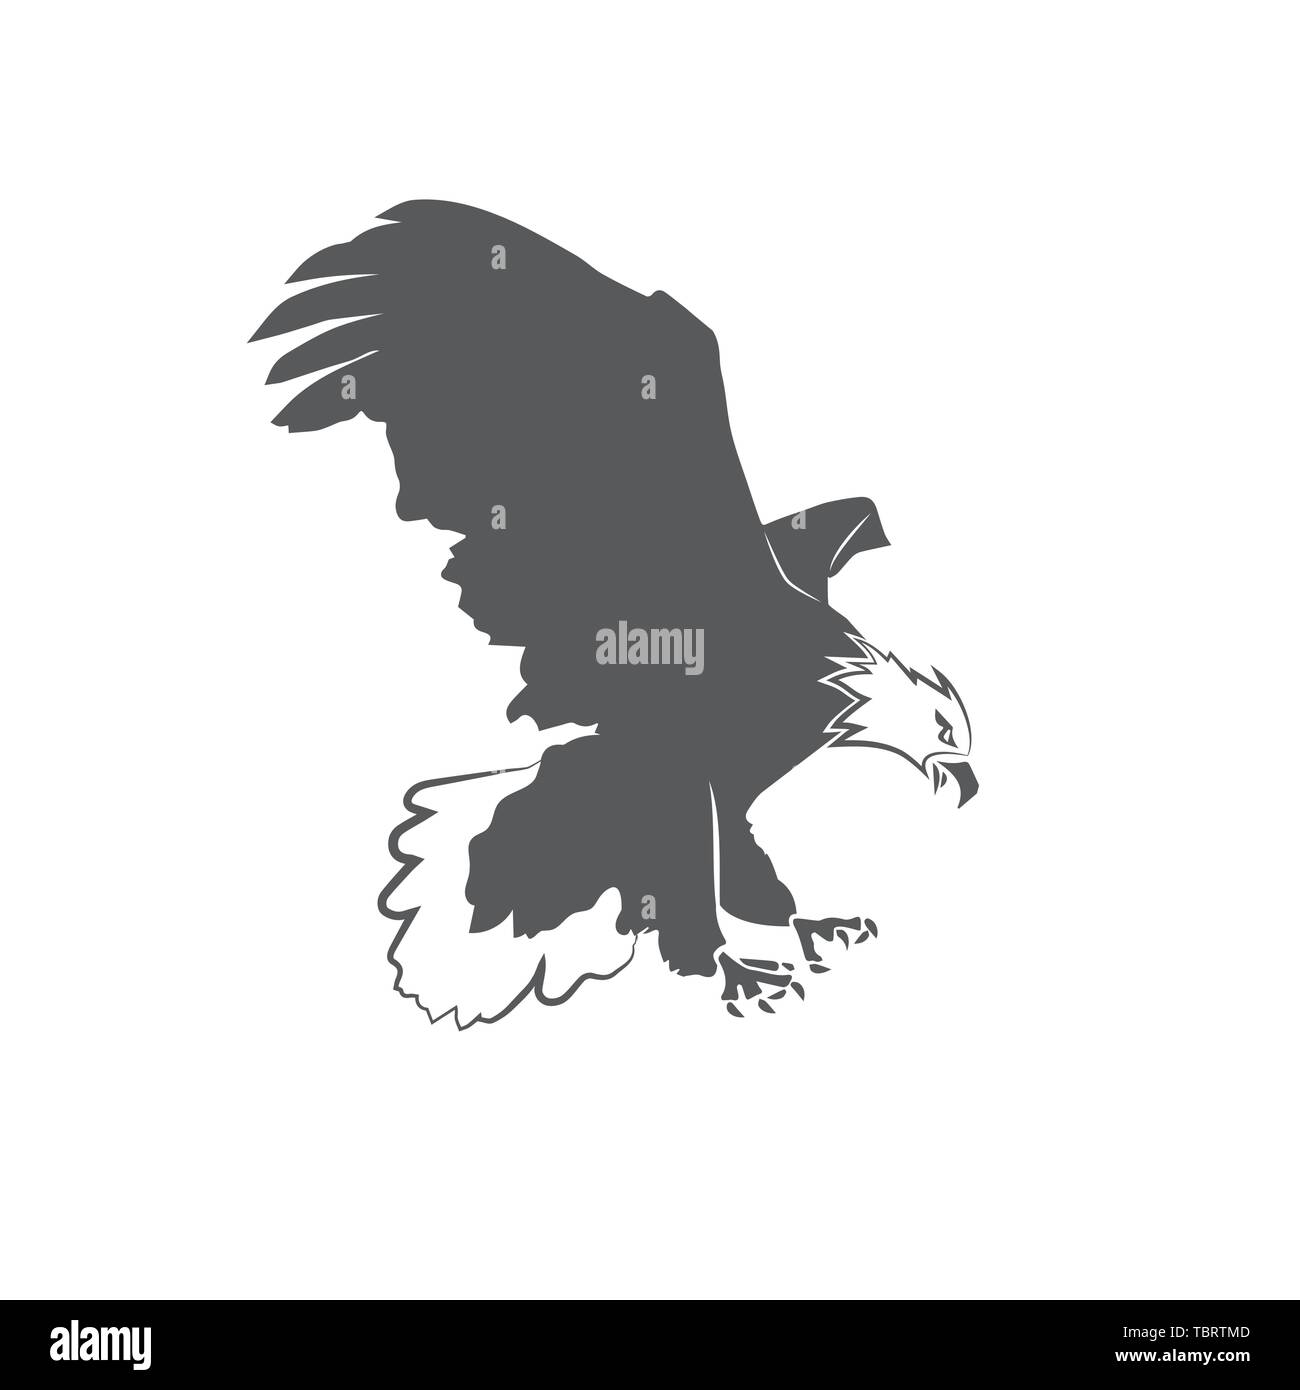 Bald eagle on shirt Stock Vector Images - Alamy